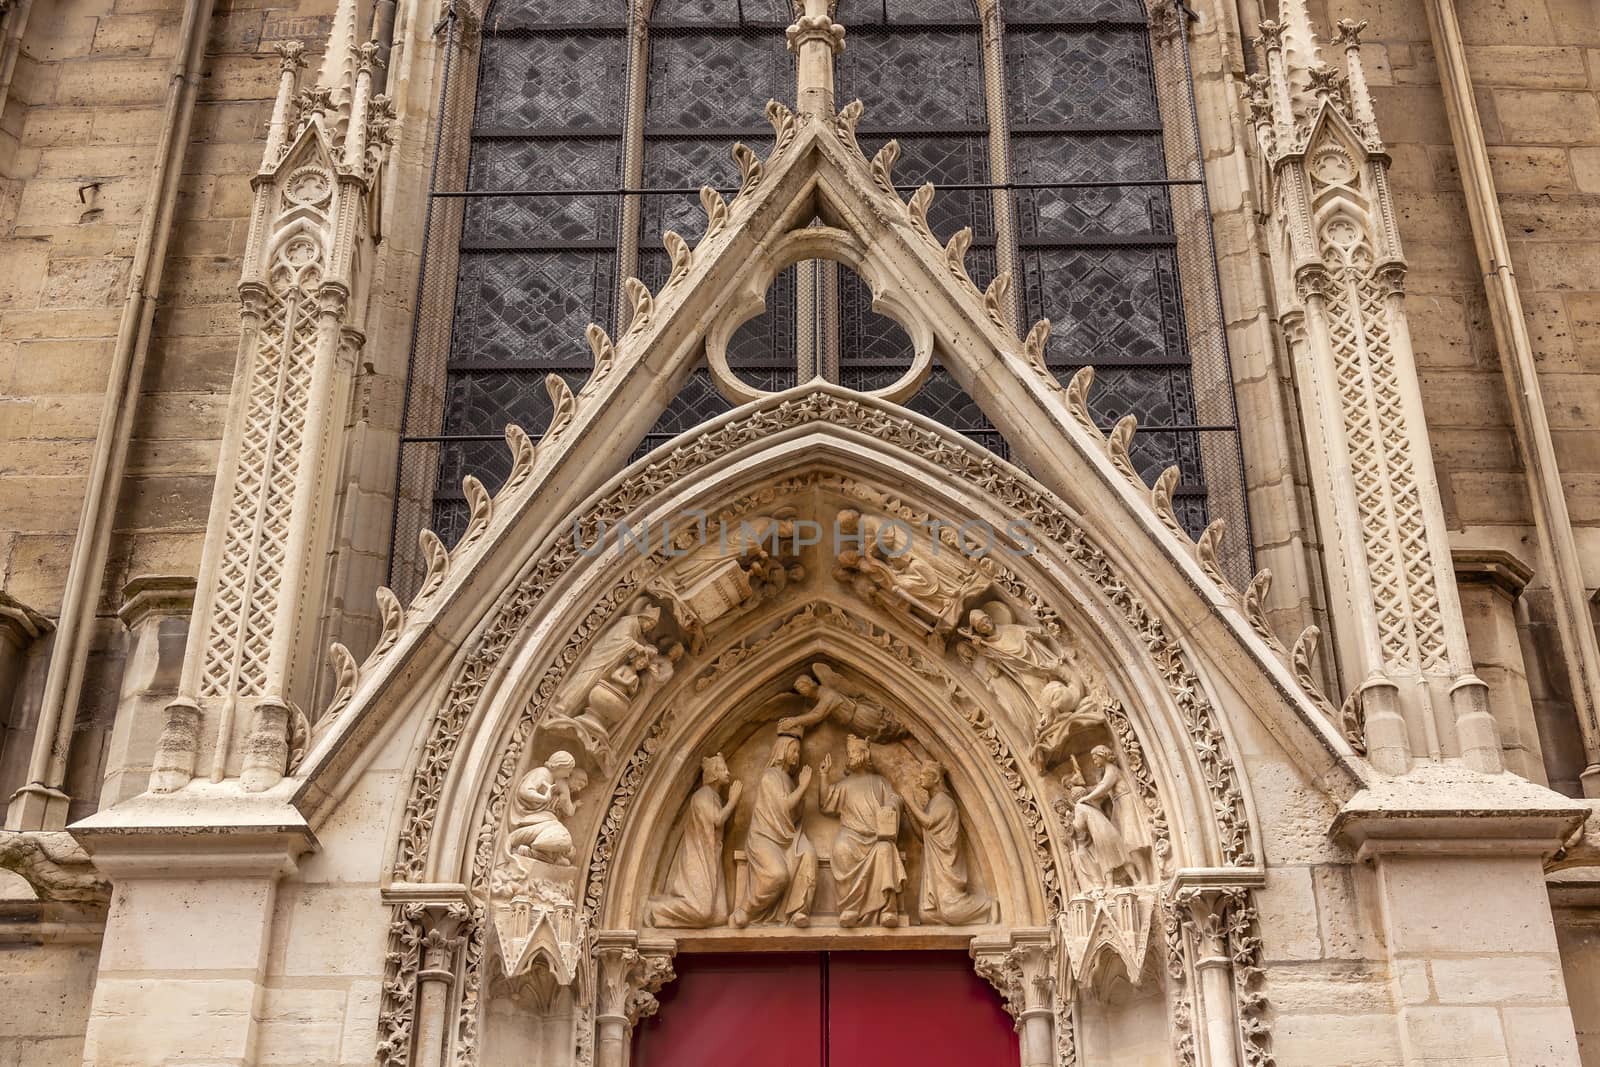 Biblical Statues Little Red Door Notre Dame Cathedral Paris France.  Notre Dame was built between 1163 and 1250AD.  